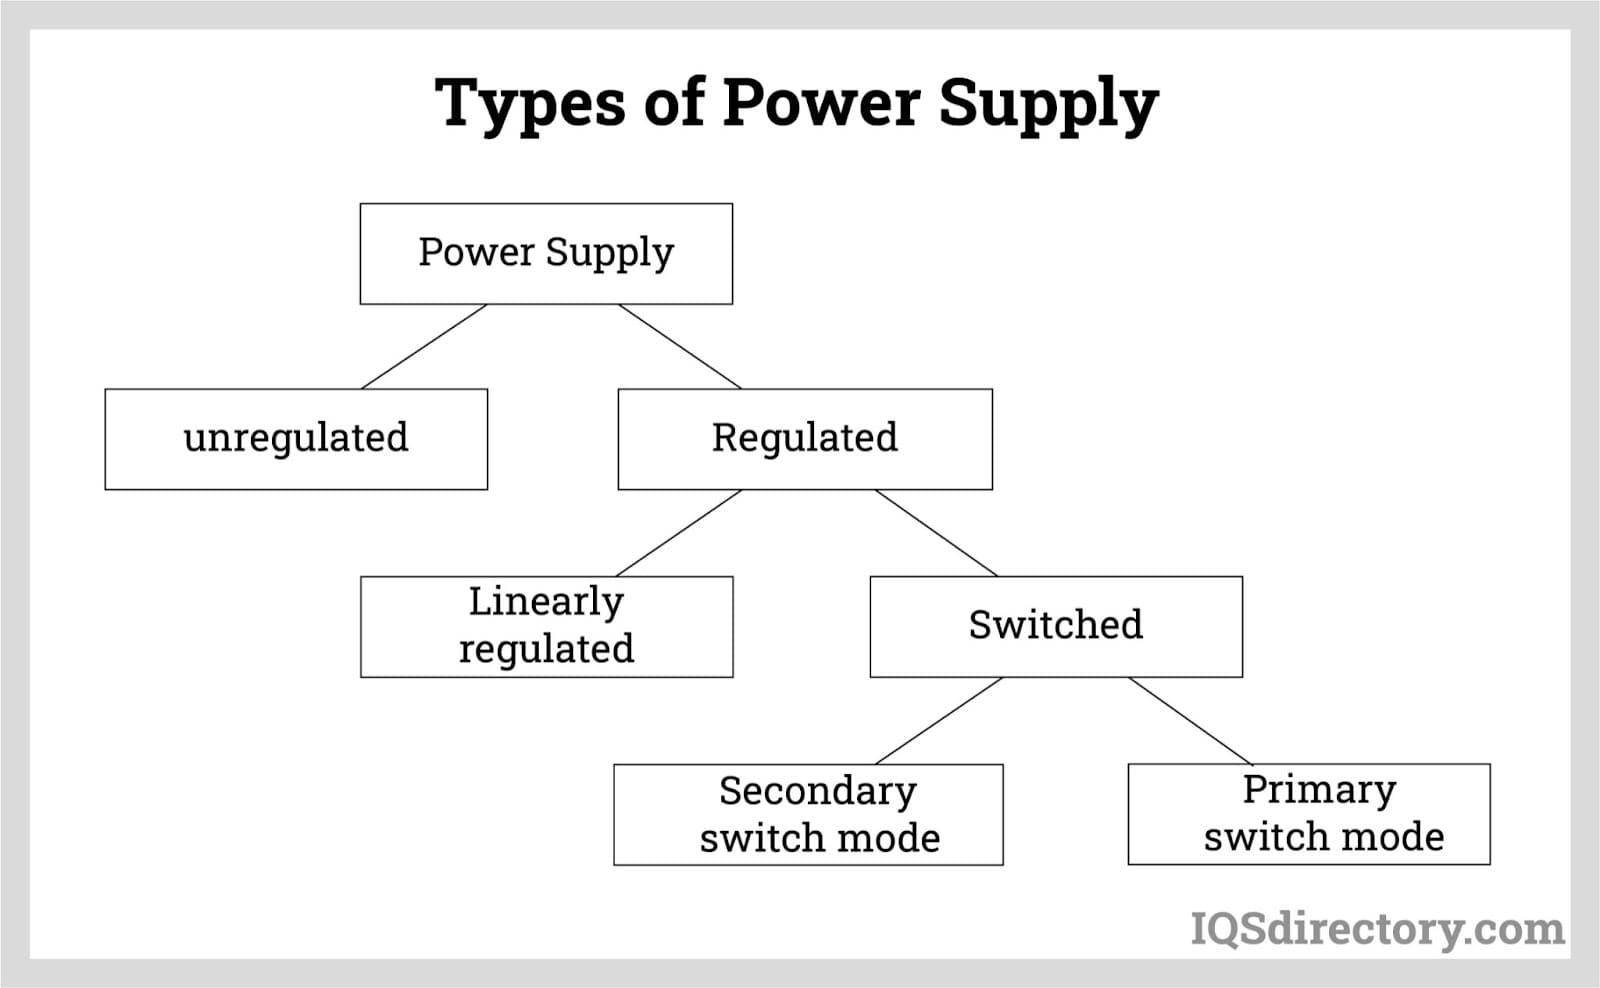 Power Supply Definition - What is a power supply?